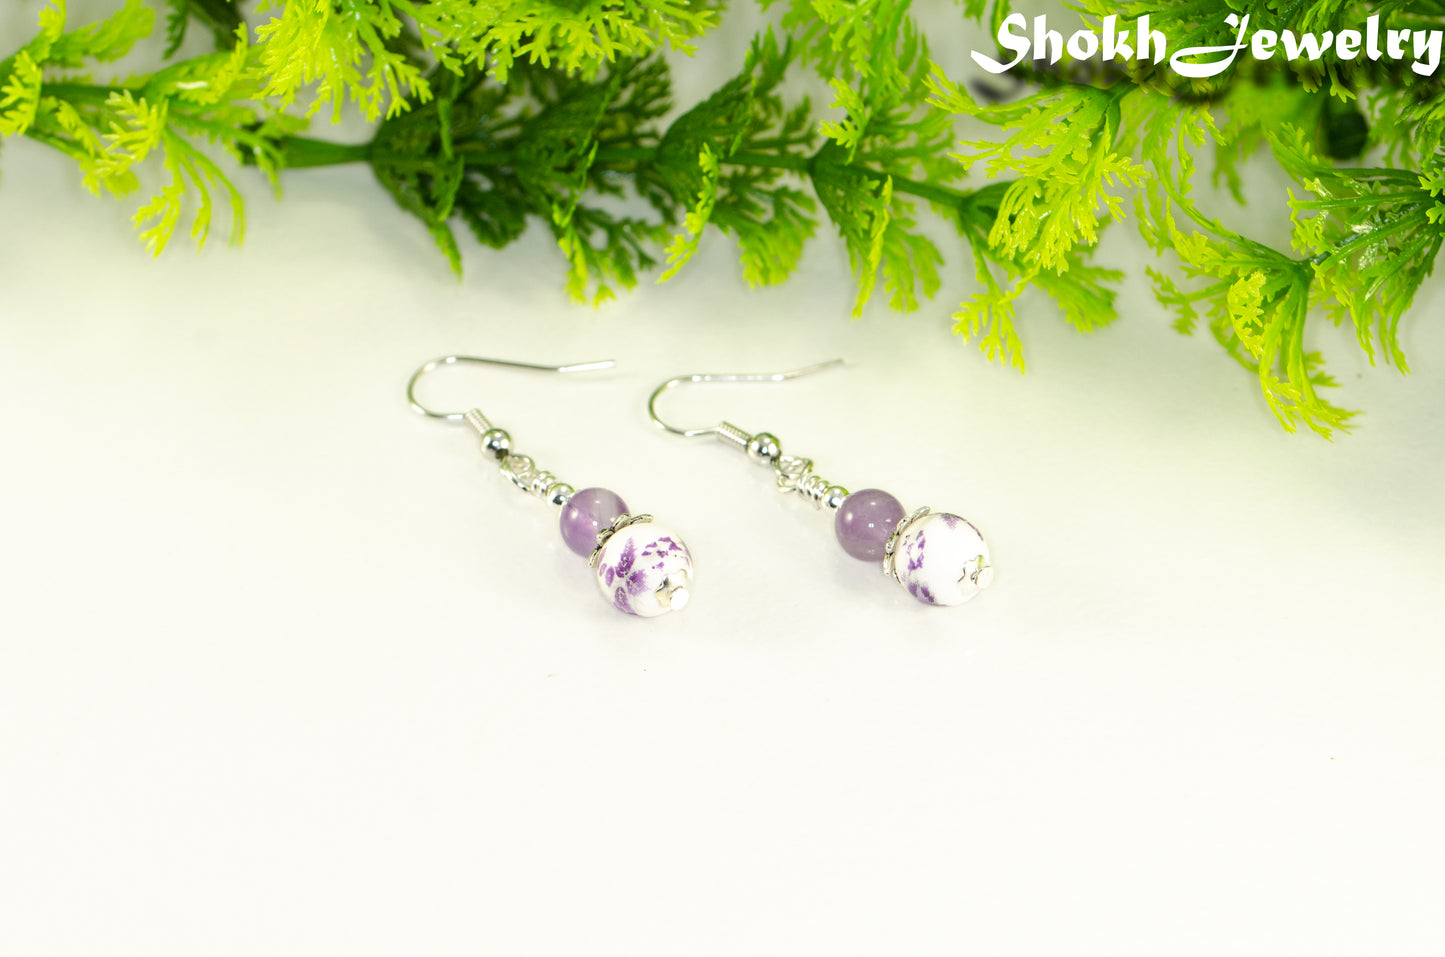 Small Floral Ceramic Bead and Amethyst Earrings.